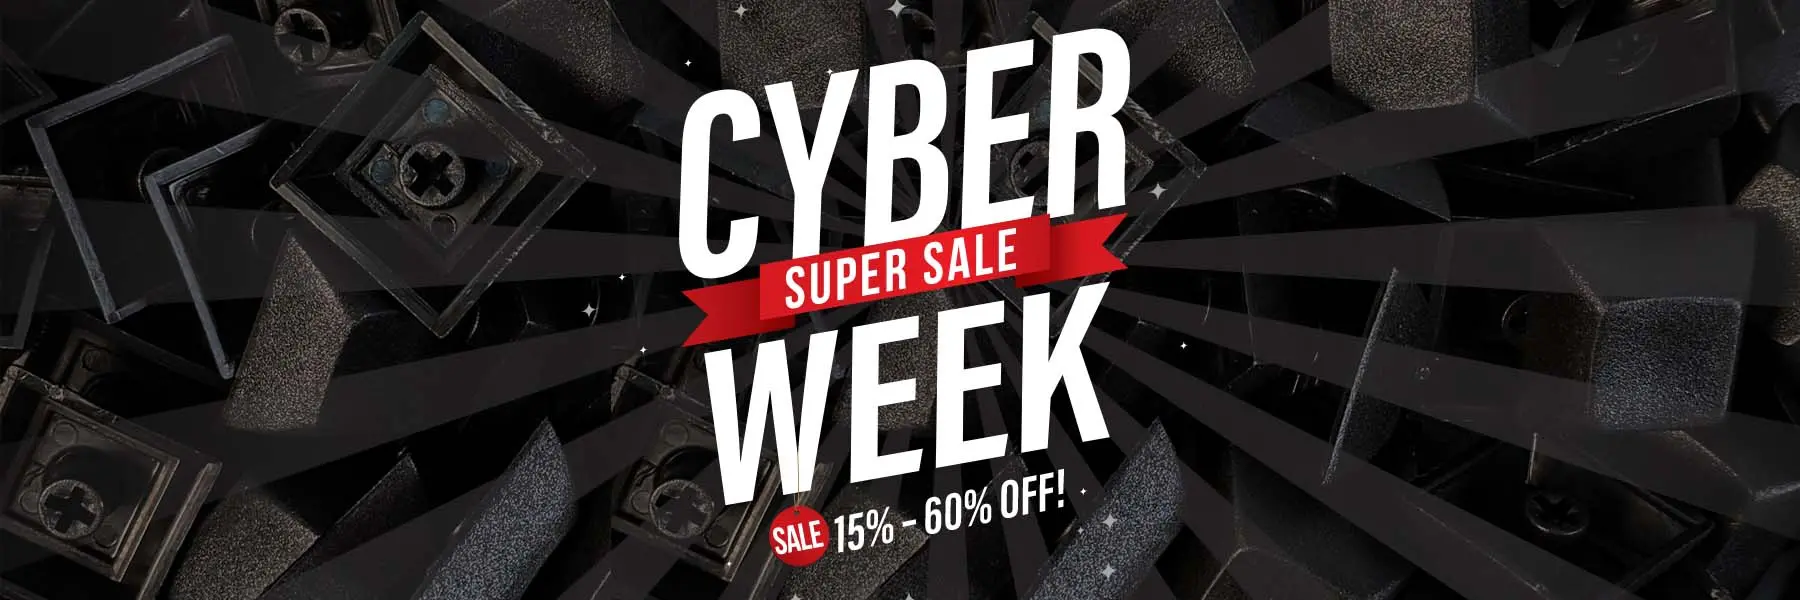 Cyber Week Super Sale: 15% to 60% Off!